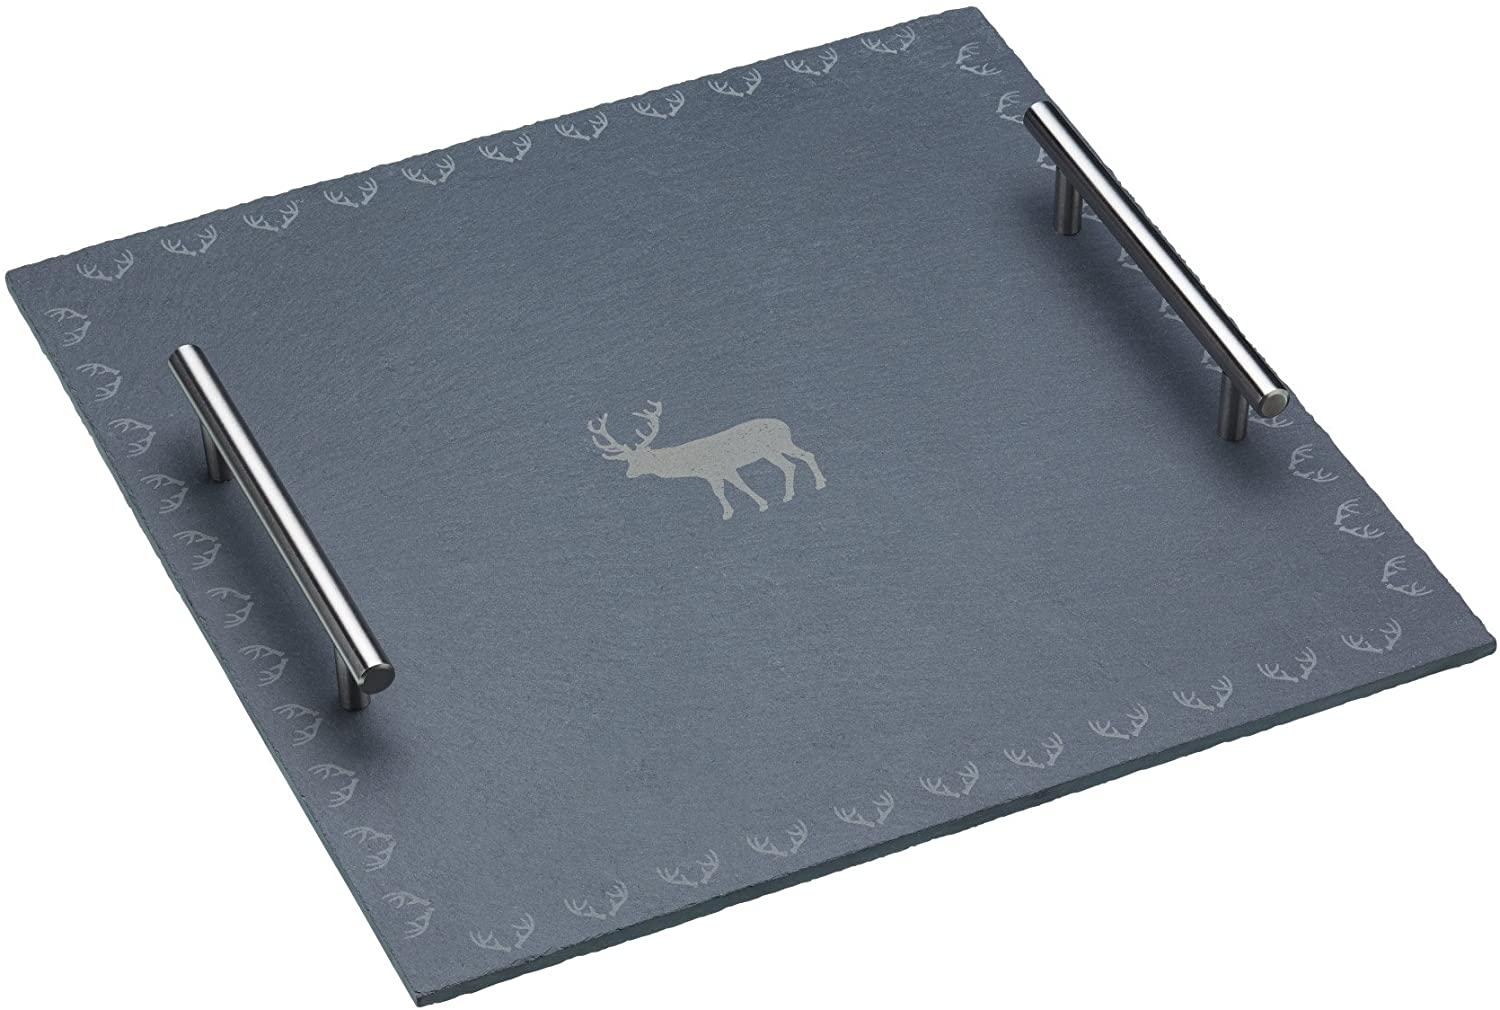 Kitchencraft \'We Love Christmas Slate Serving Tray with Handles and Reindeer Design, 12 x 12 inch (30 x 30 cm – Grey